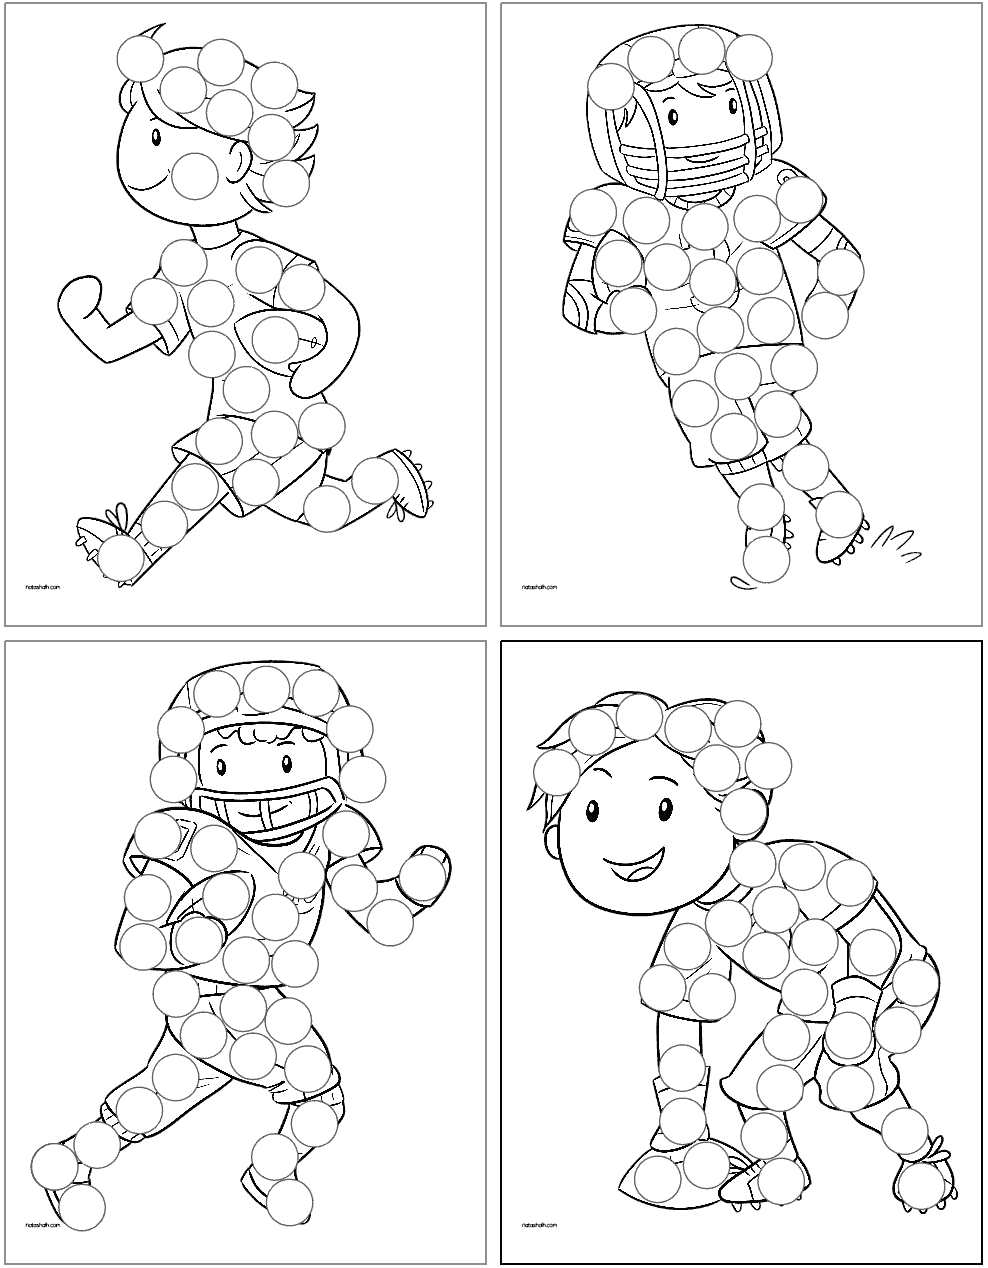 four dot marker pages showing kids playing football